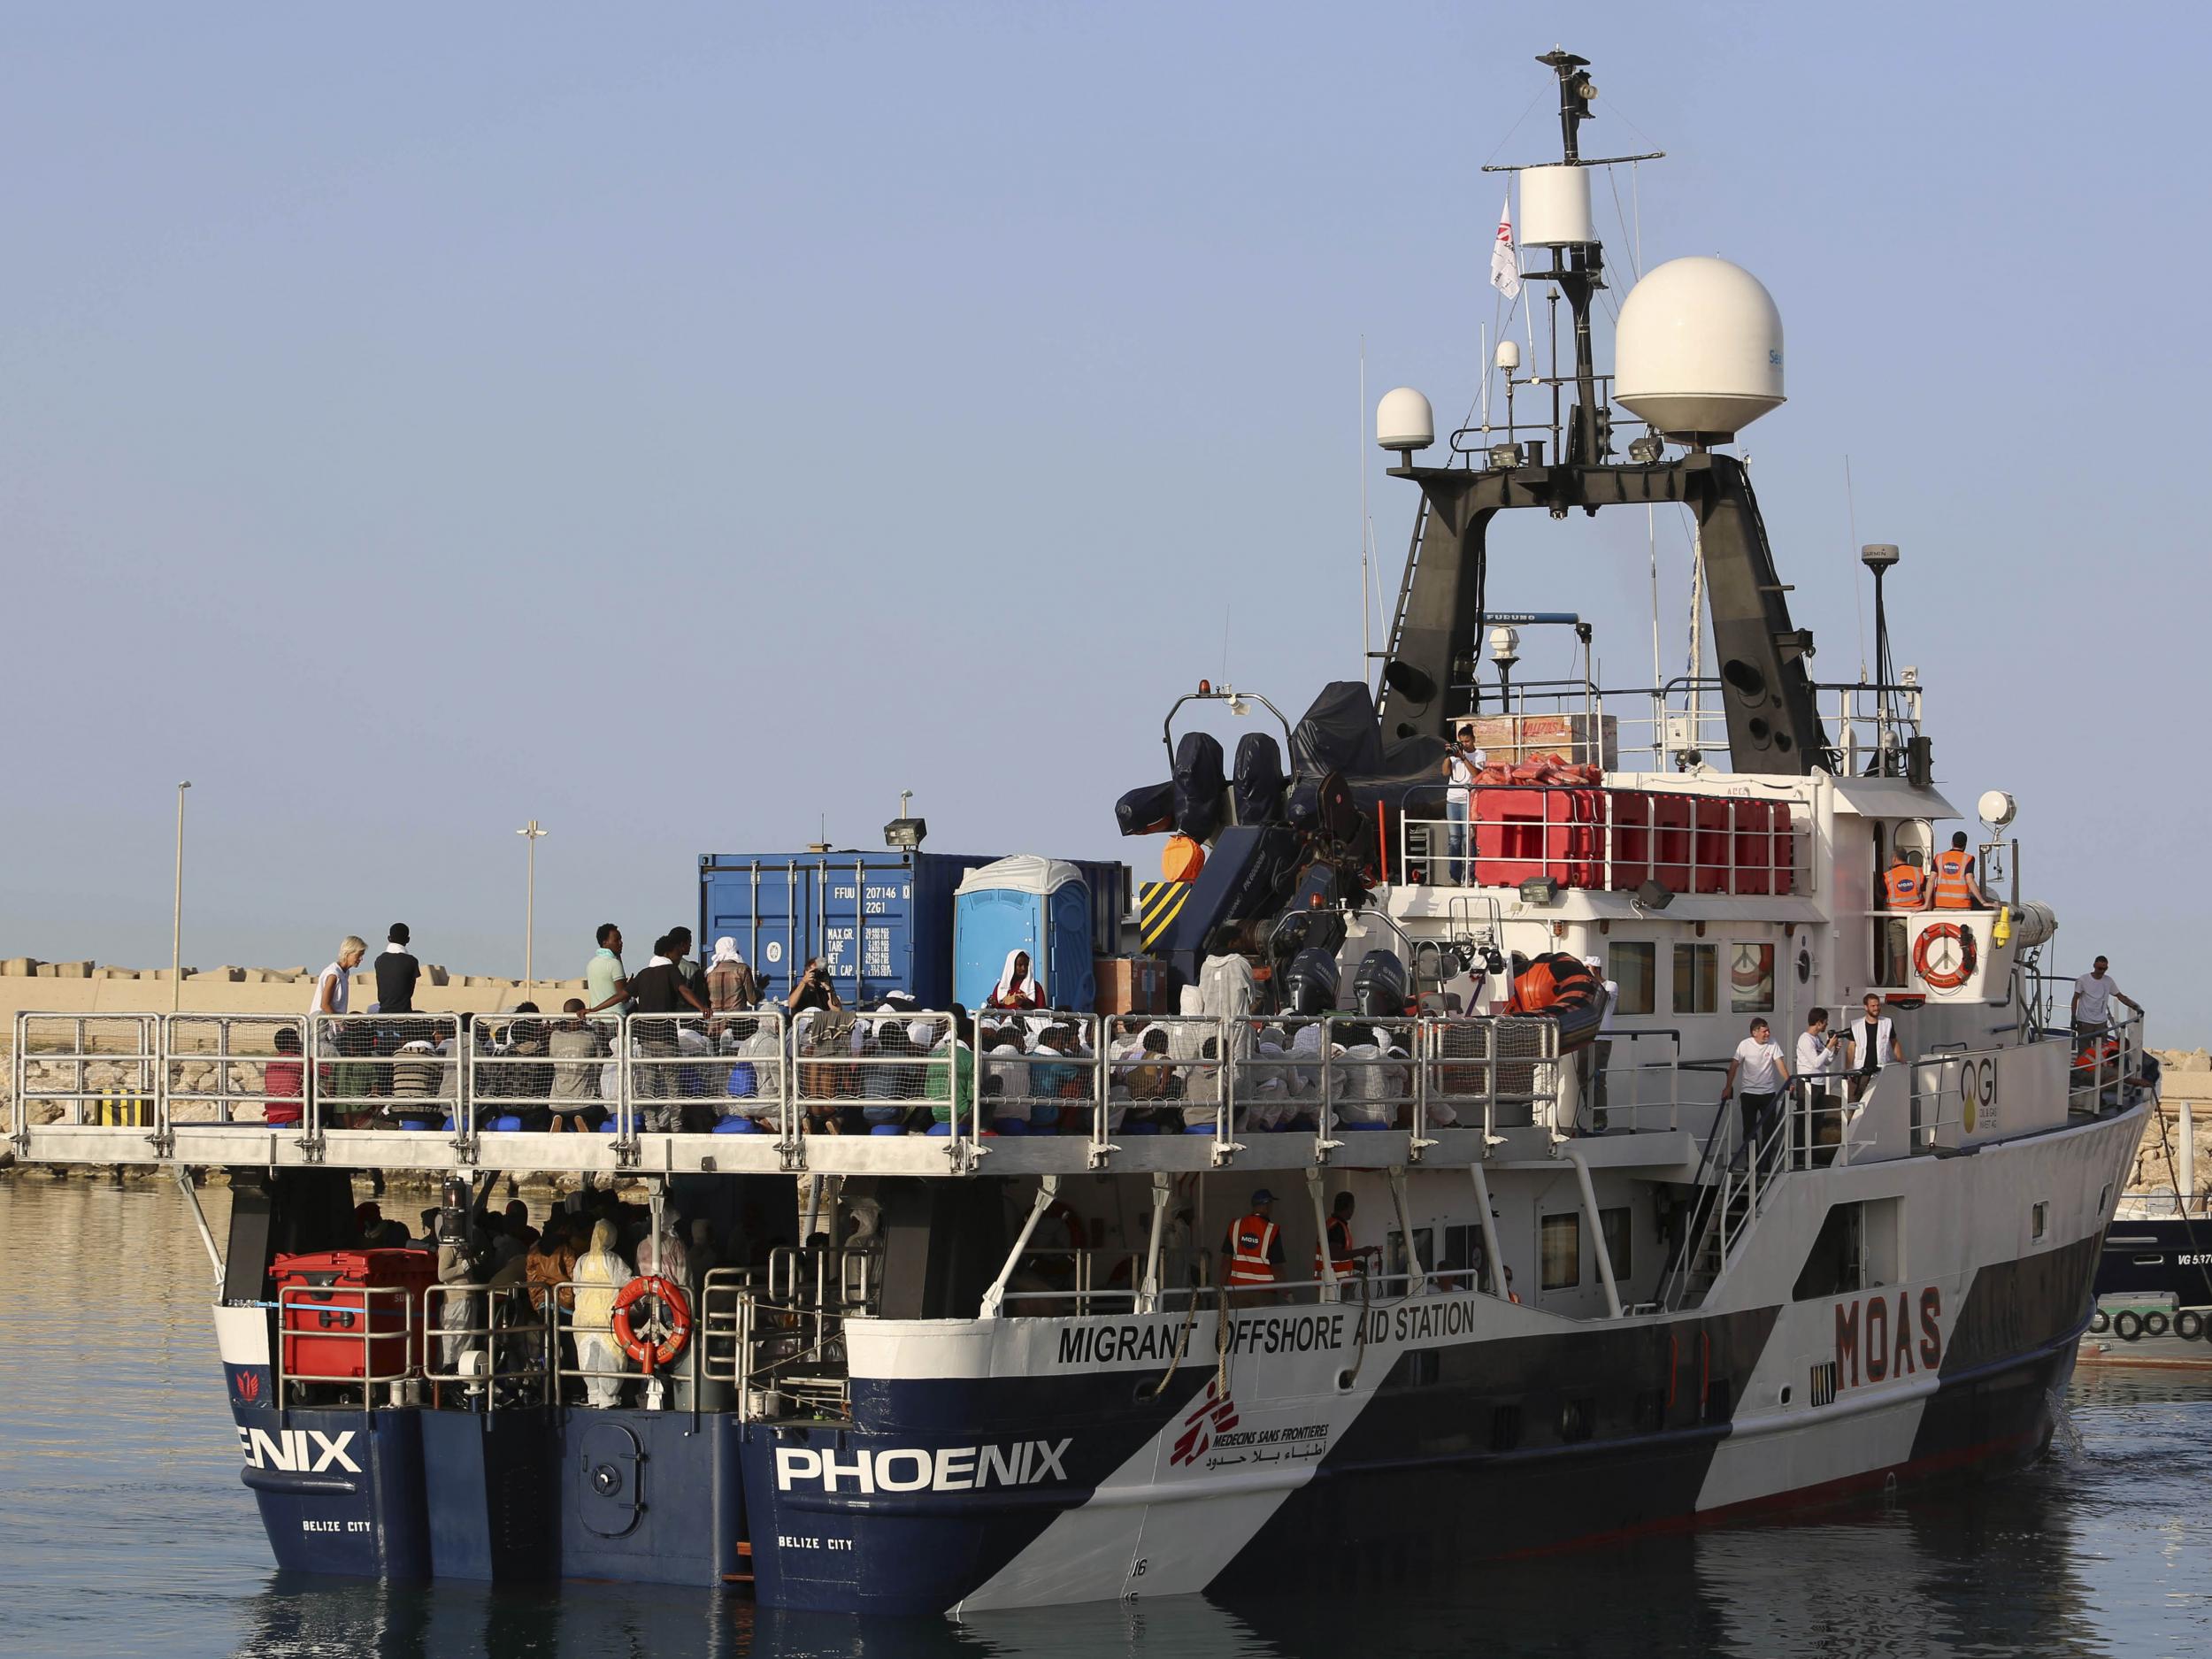 The MOAS rescue ship Phoenix moored in the Sicilian harbour of Pozzallo, Italy